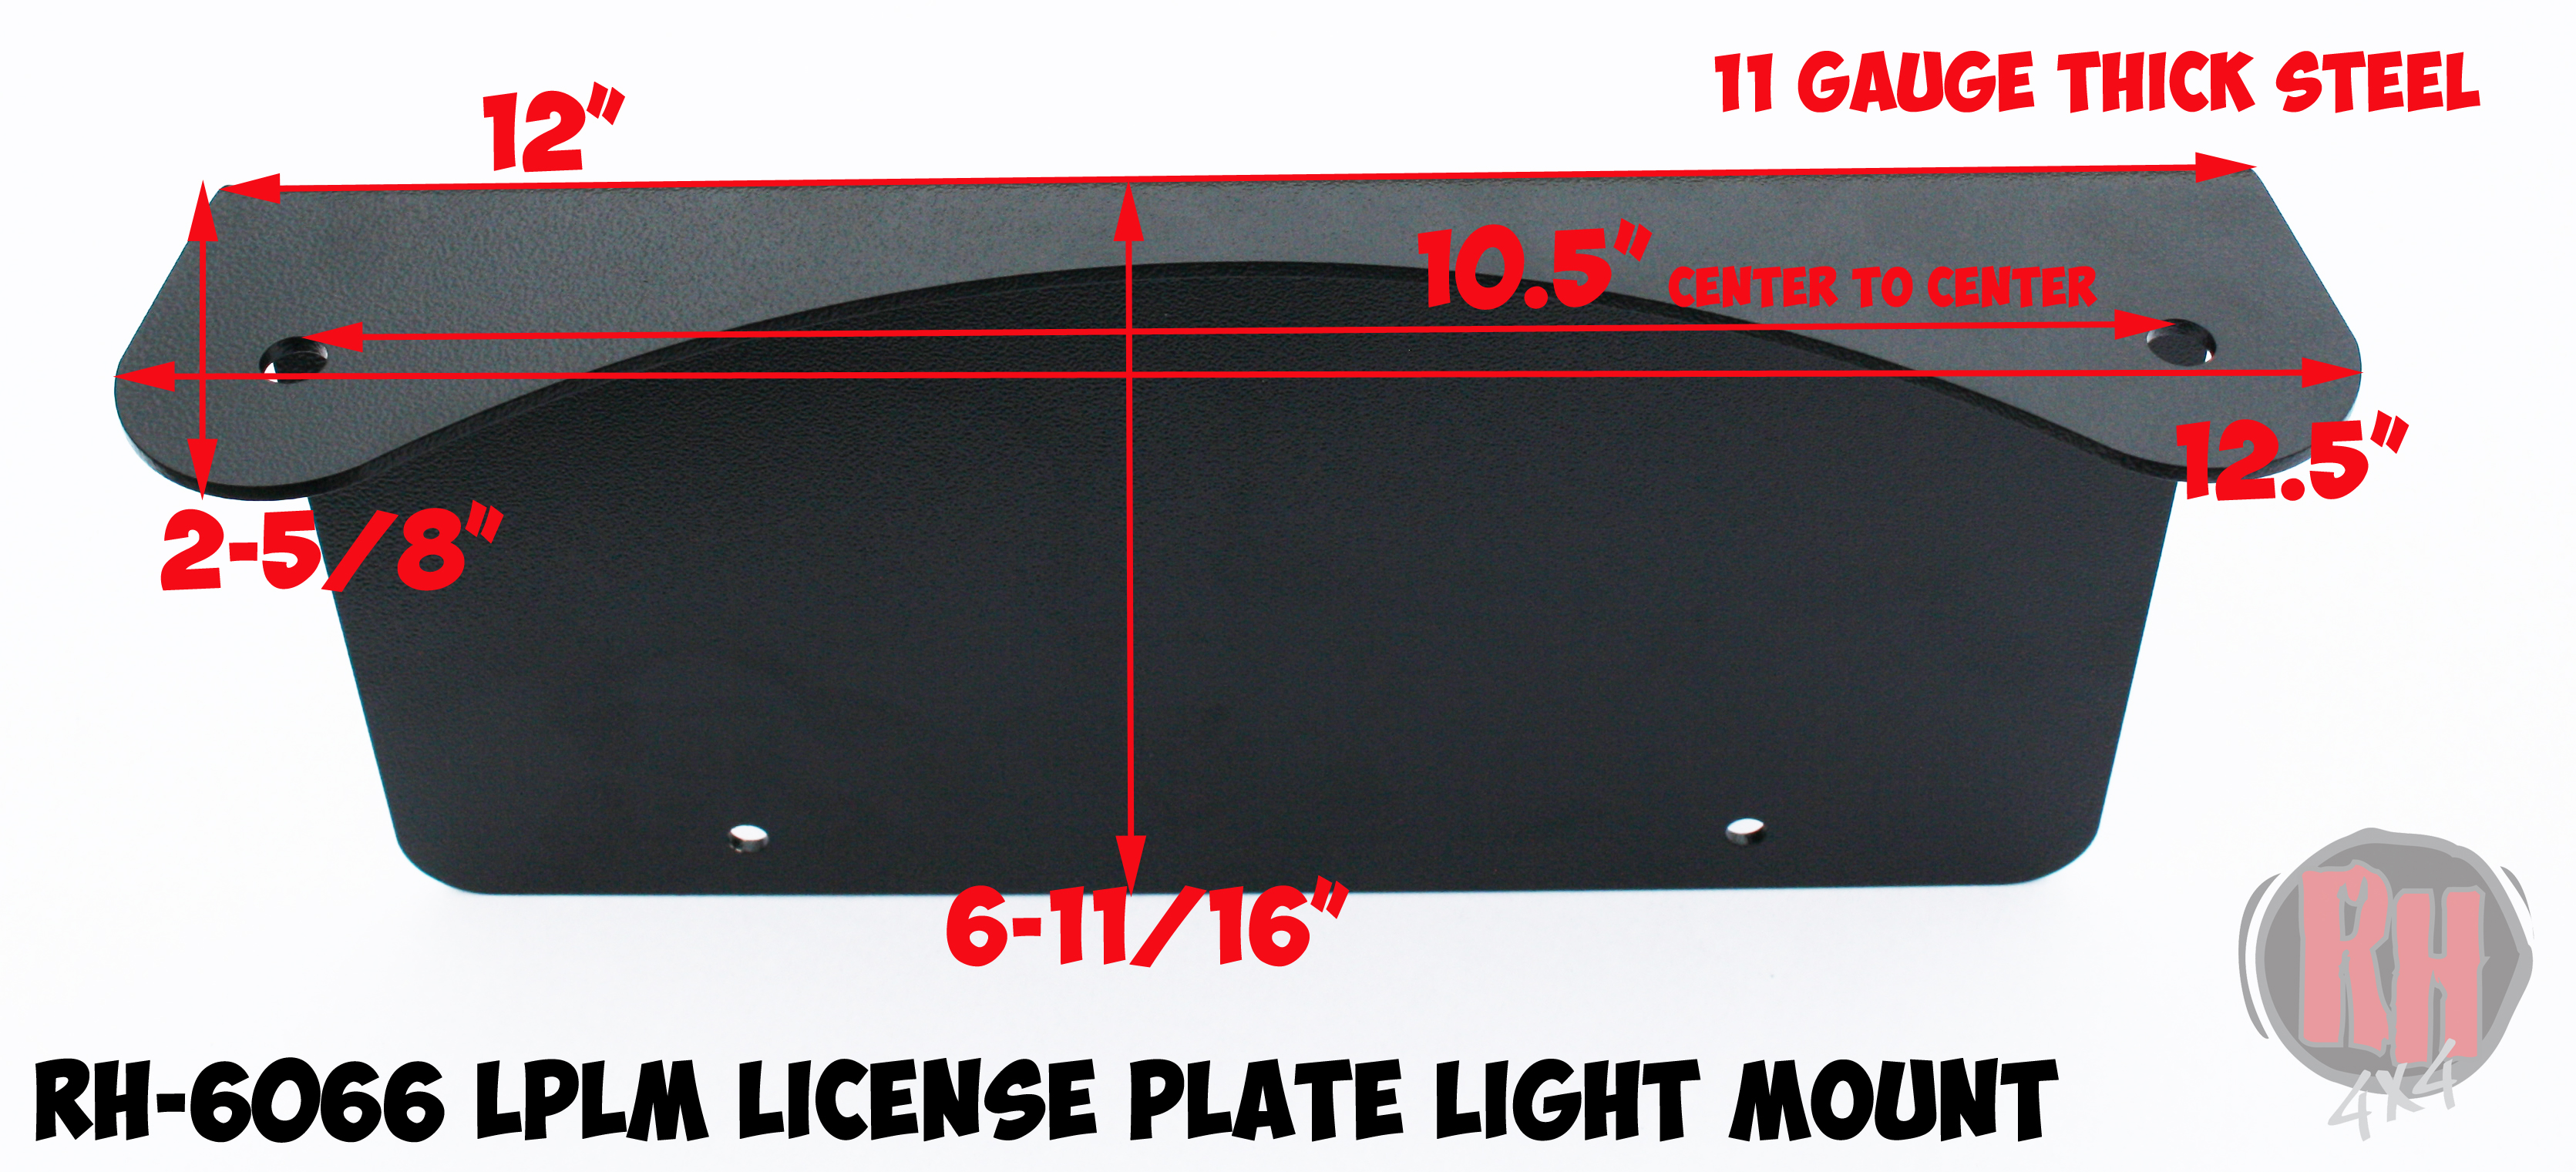 Rock Hard 4x4™ LPLM License Plate Light Mount (Fits Individual or